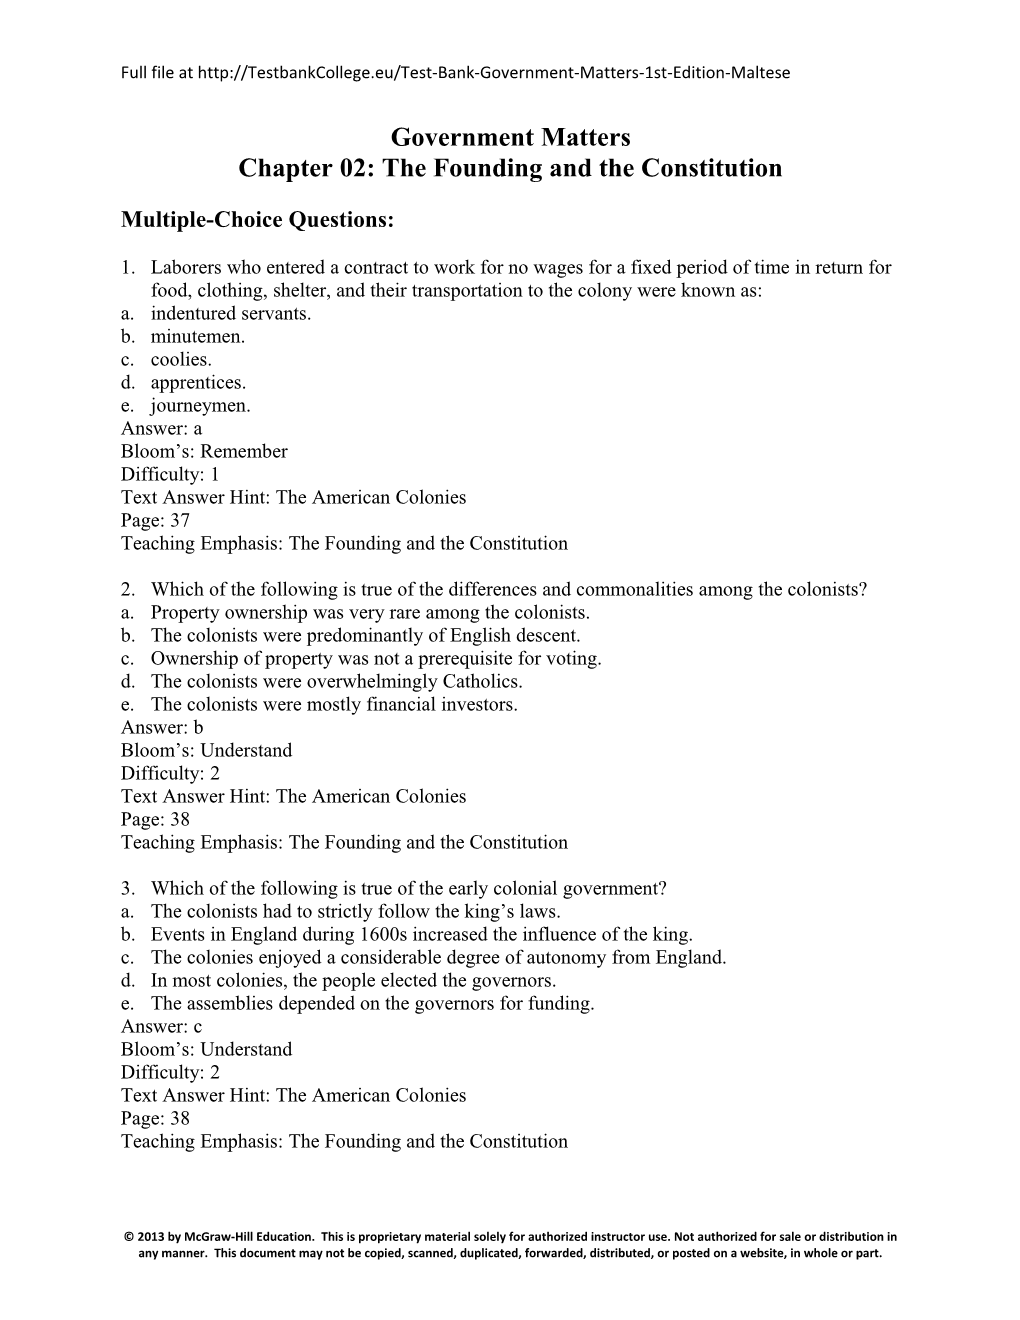 Chapter 02: the Founding and the Constitution